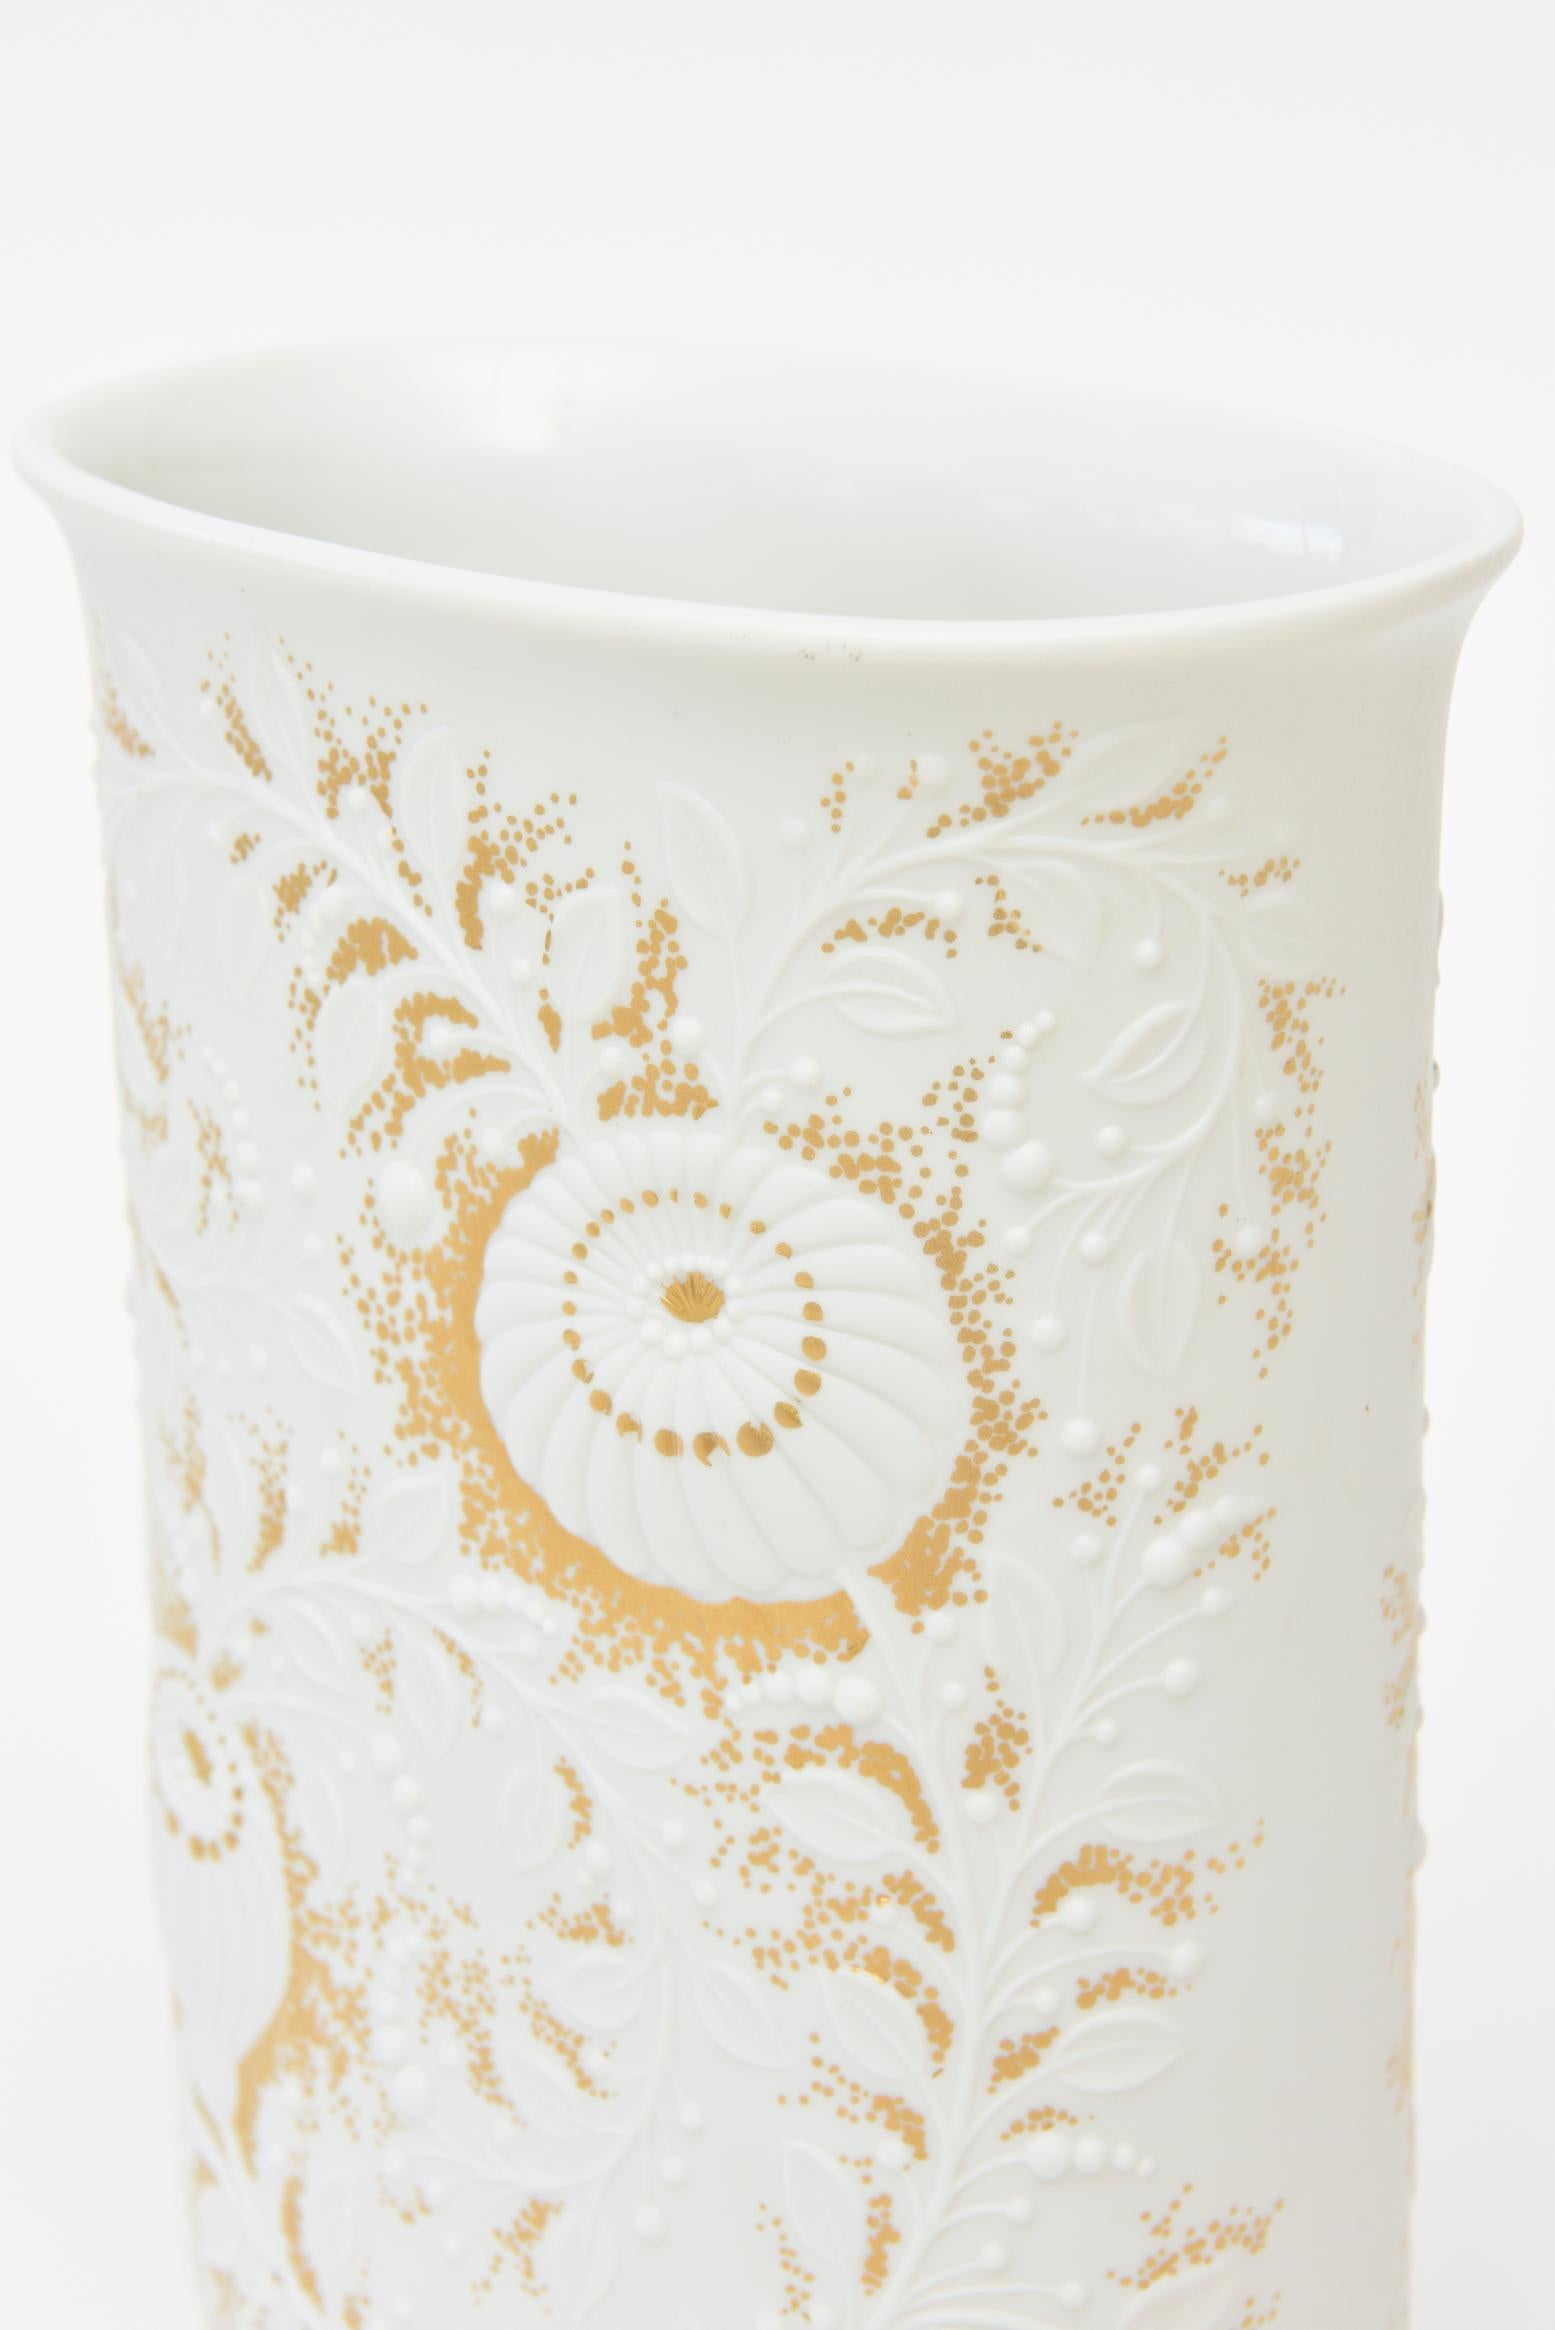 German Kaiser Signed White and Gold Porcelain Vase With Textural Applied Flowers 60's For Sale